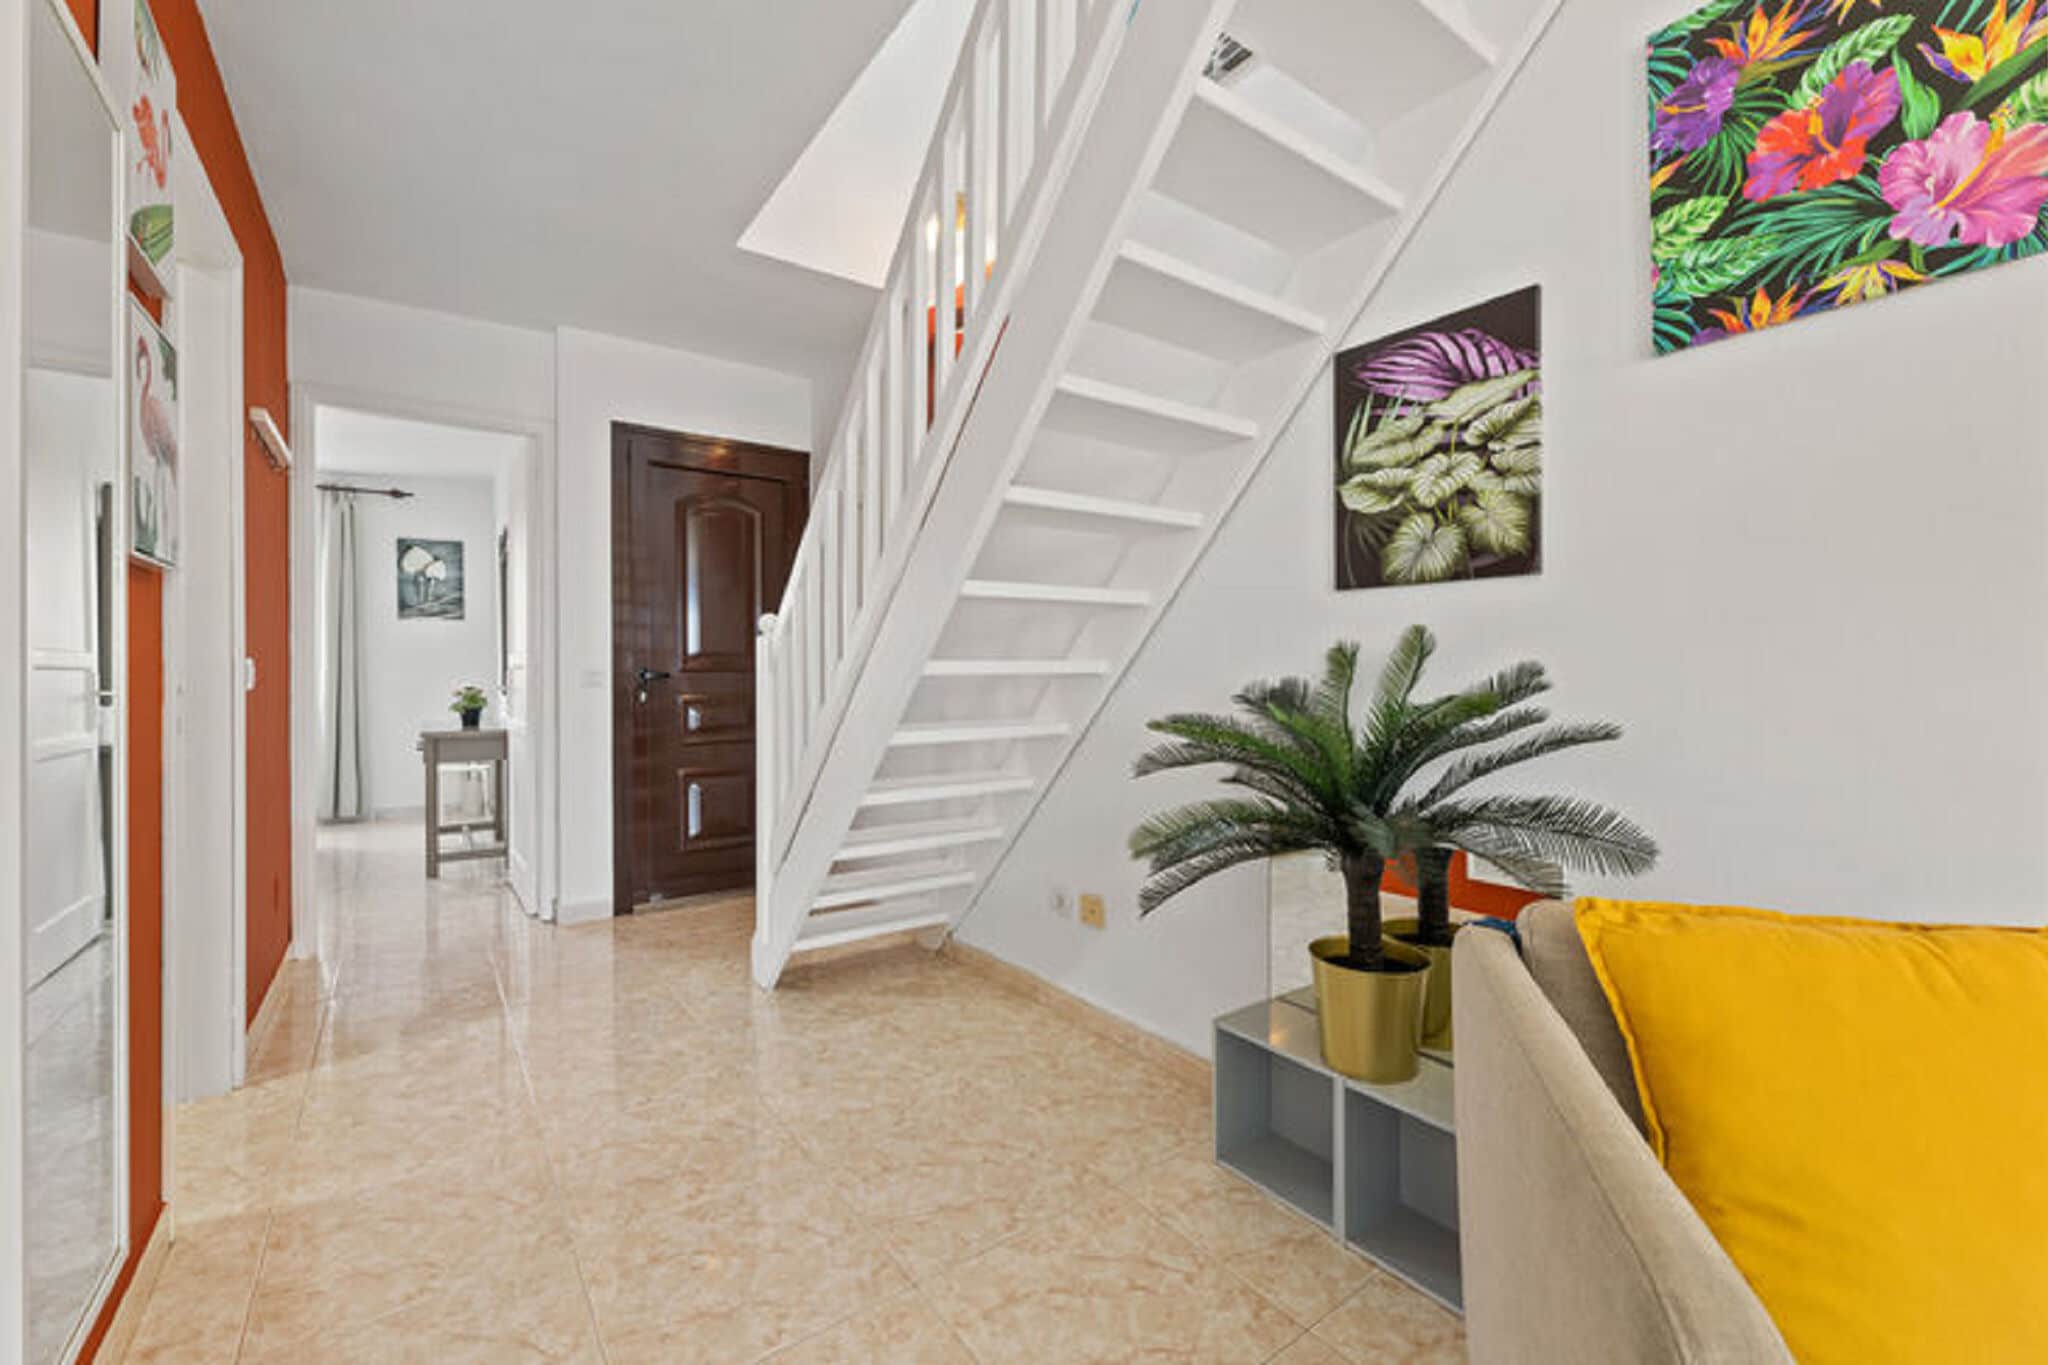 Comfortable duplex in Costa Teguise, near the beach and restaurants